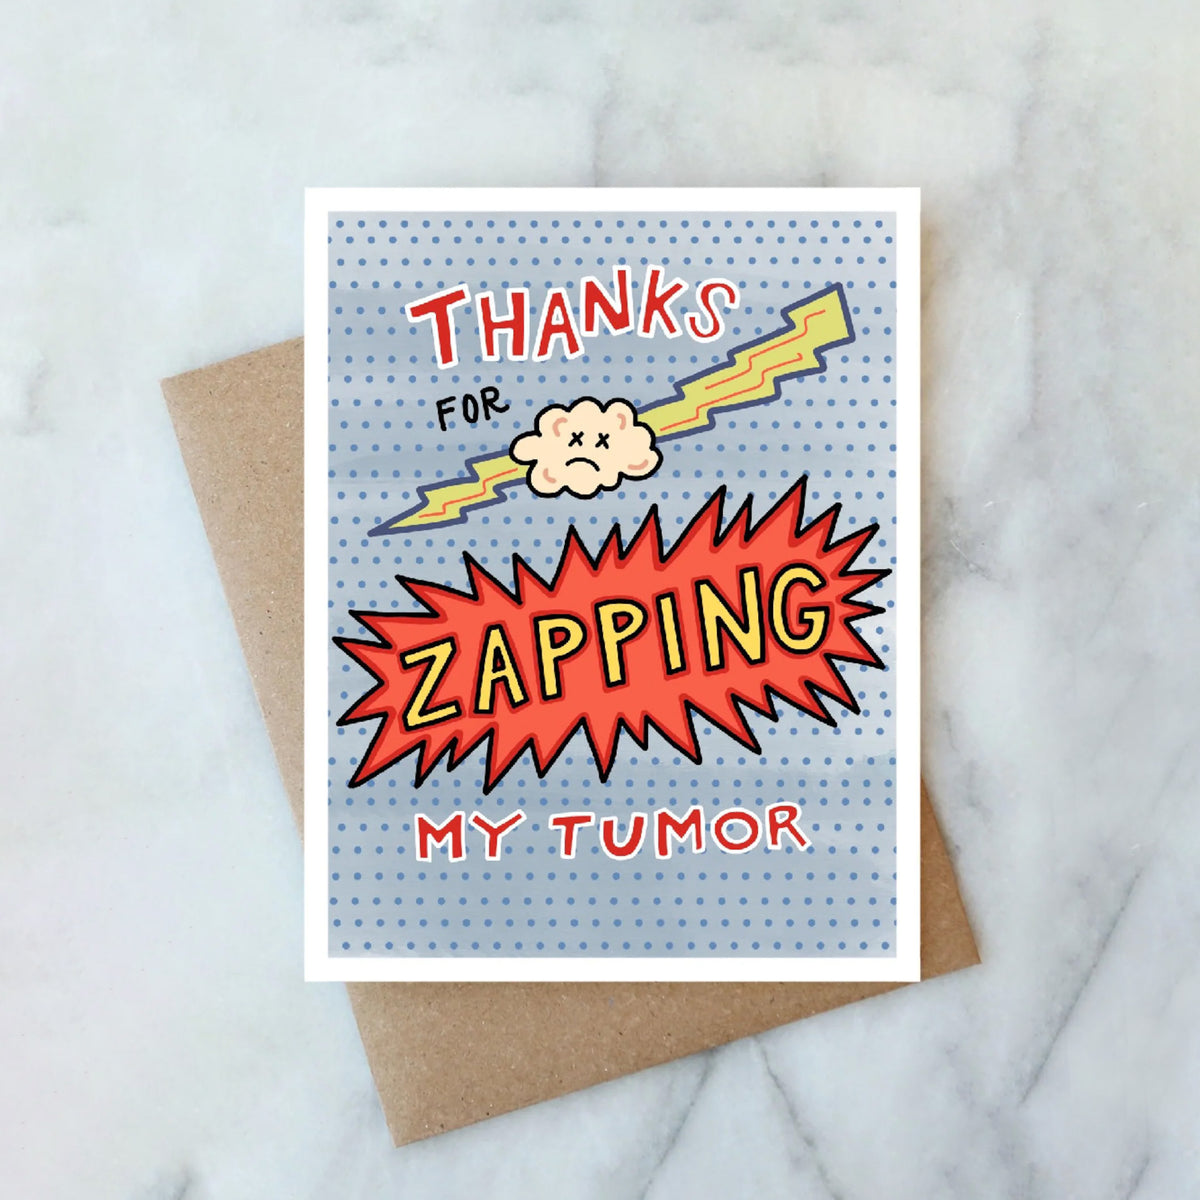 Thanks for Zapping - Greeting Card